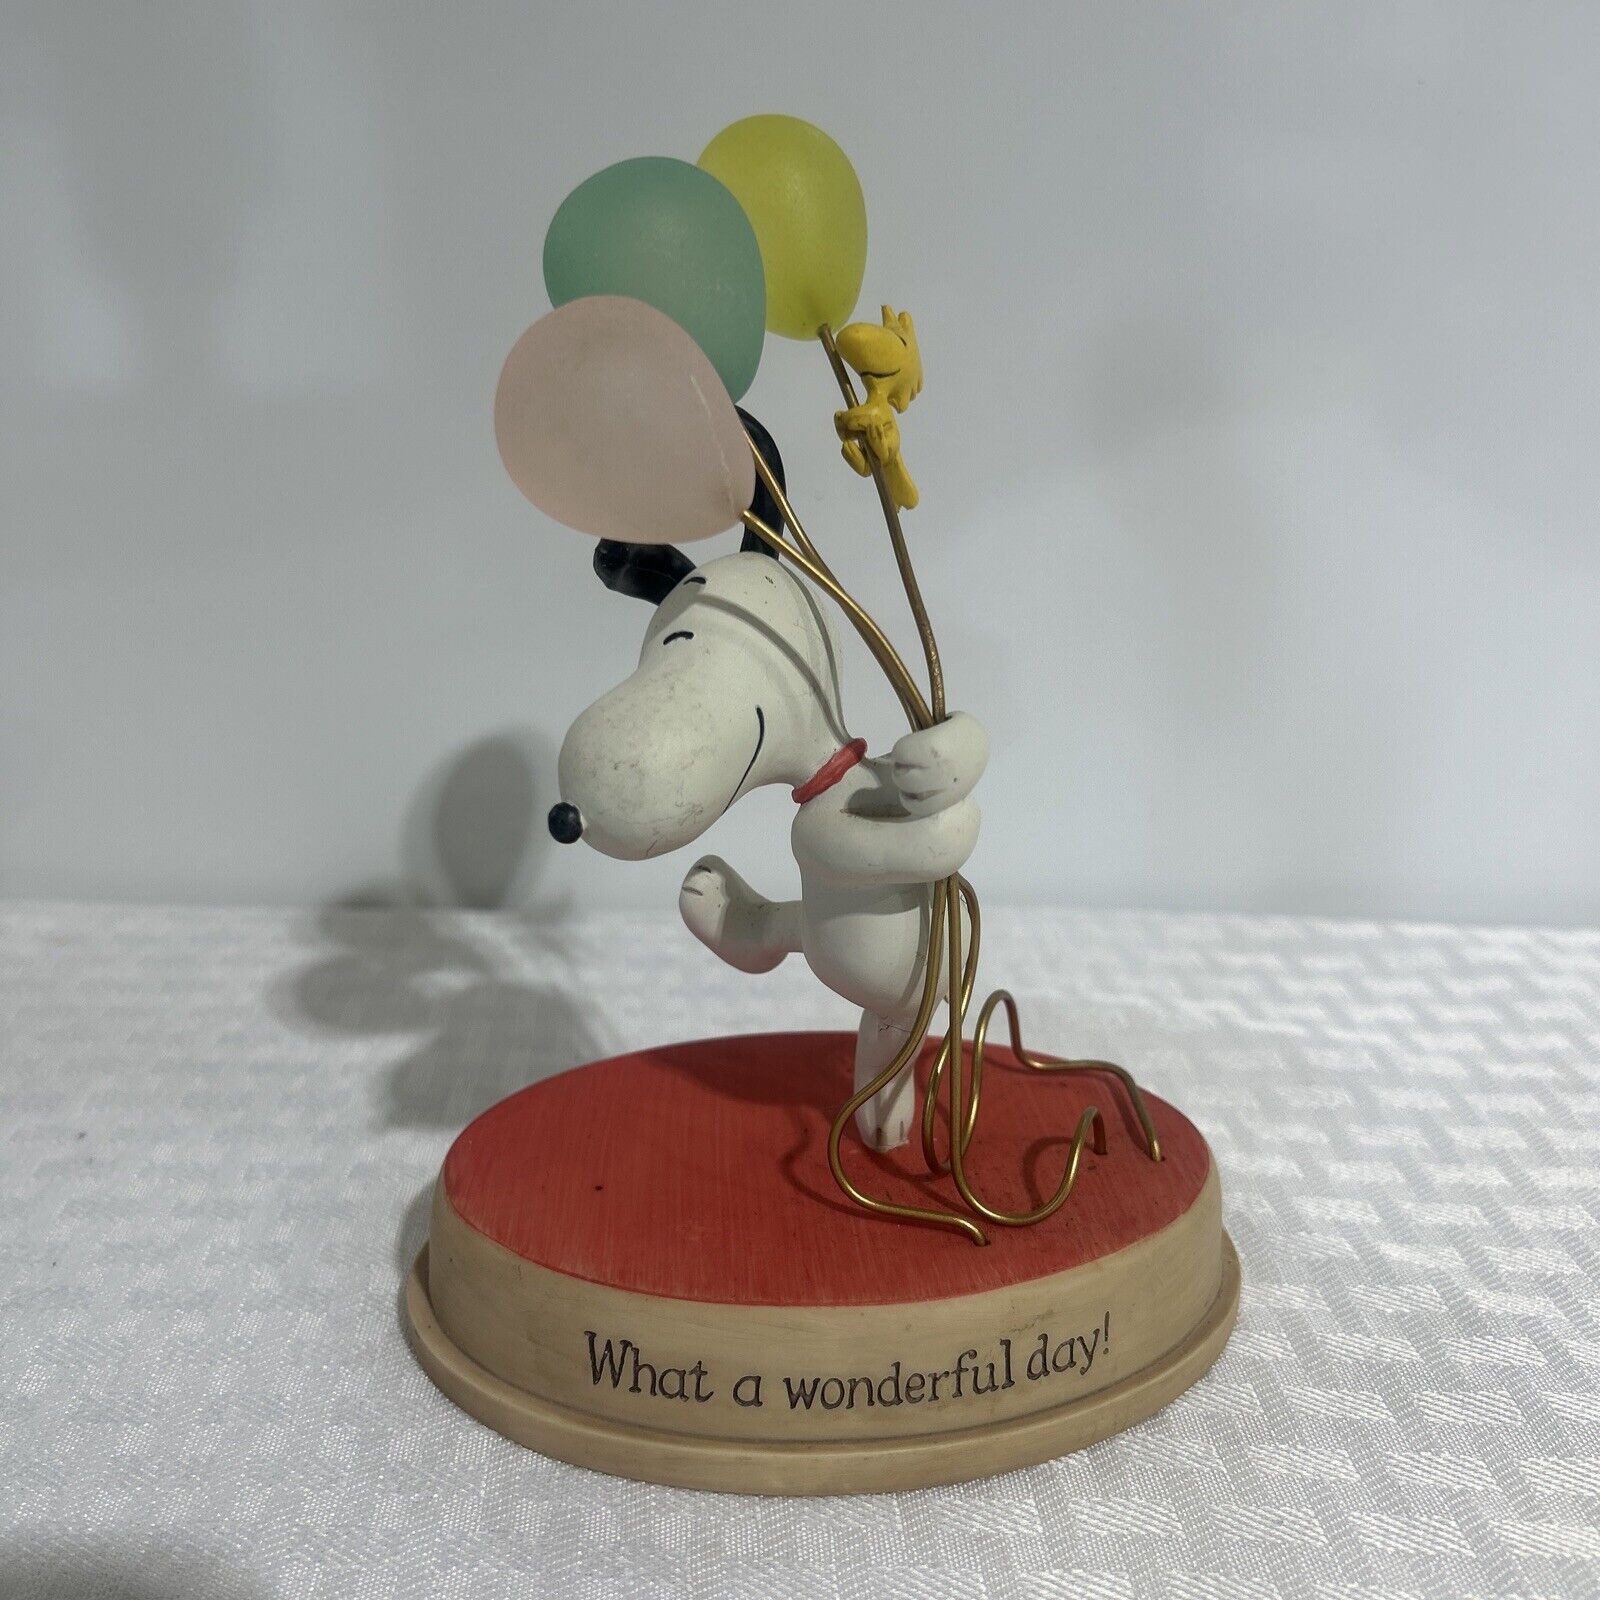 Hallmark Peanuts Gallery 2010 Snoopy And Woodstock What A Wonderful Day Figurine